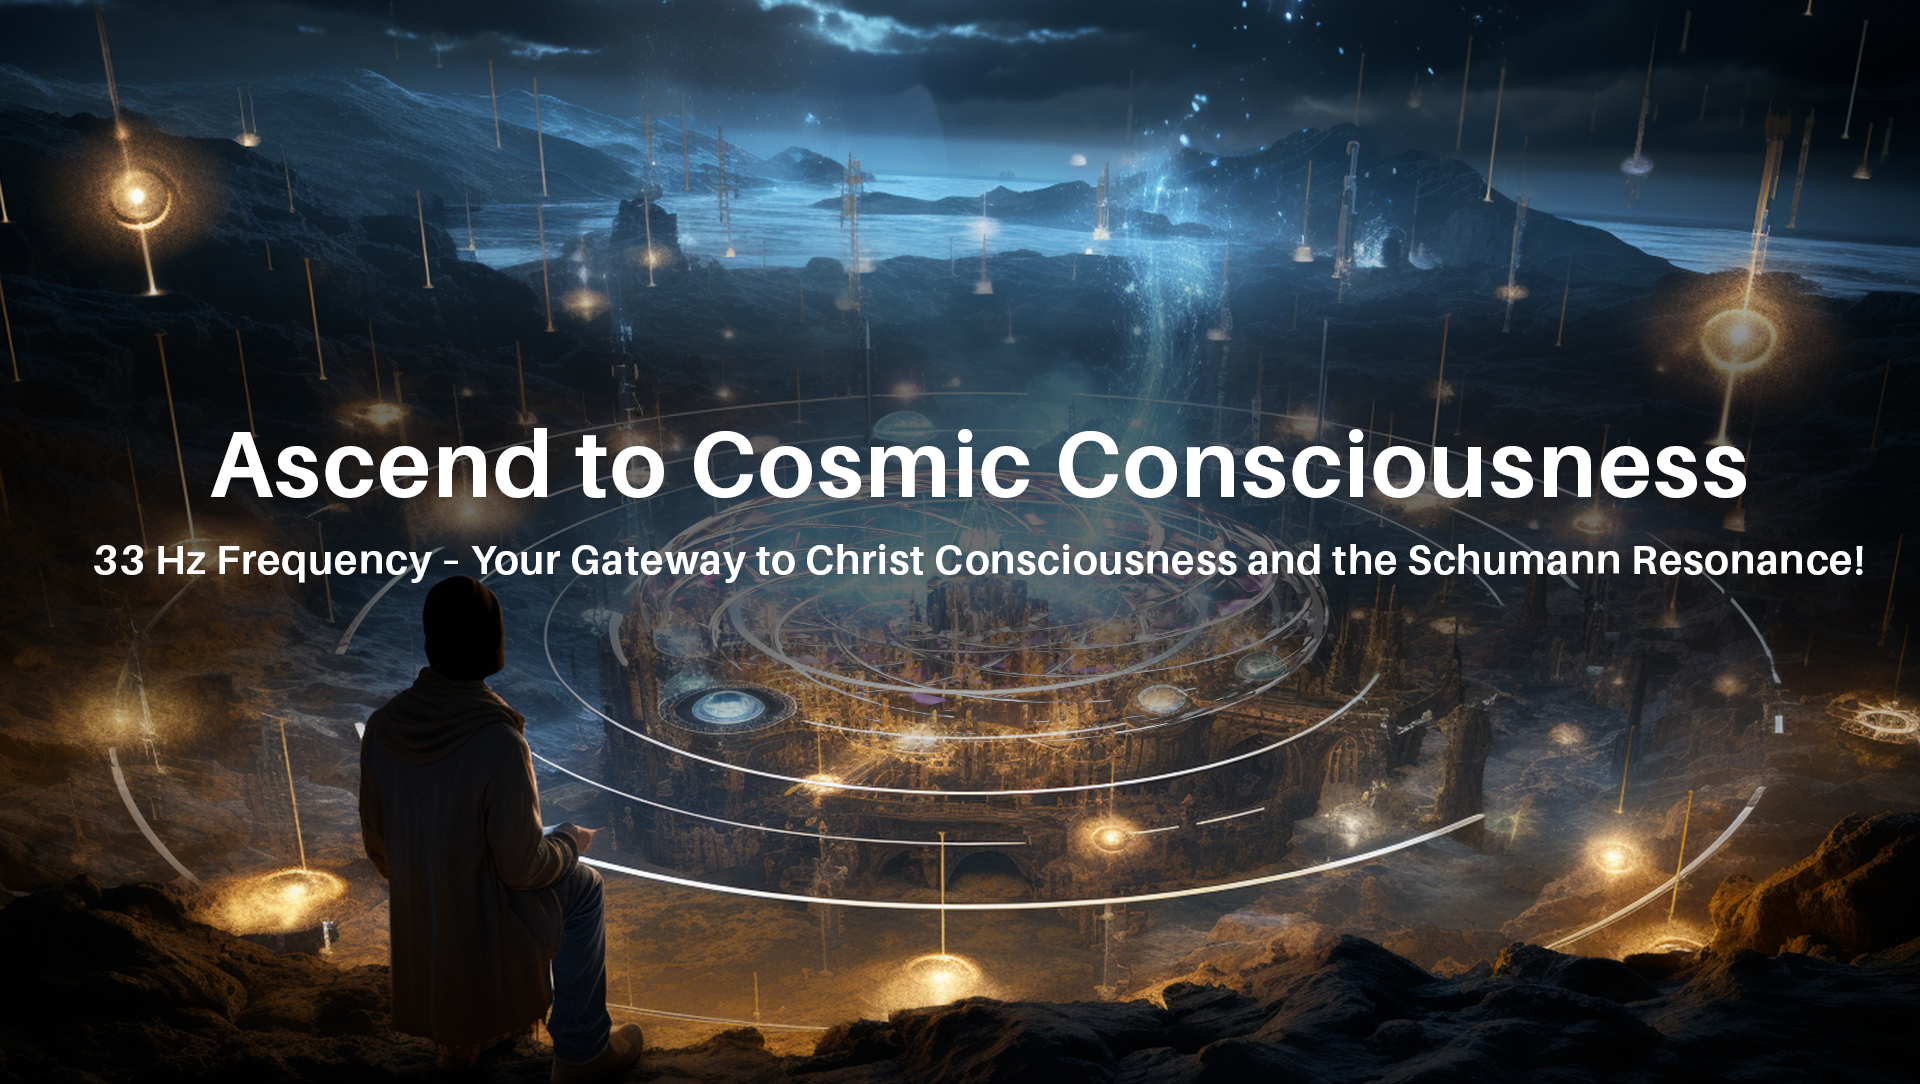 Ascend to Cosmic Consciousness: 33 Hz Frequency – Your Gateway to Christ Consciousness and the Schumann Resonance!